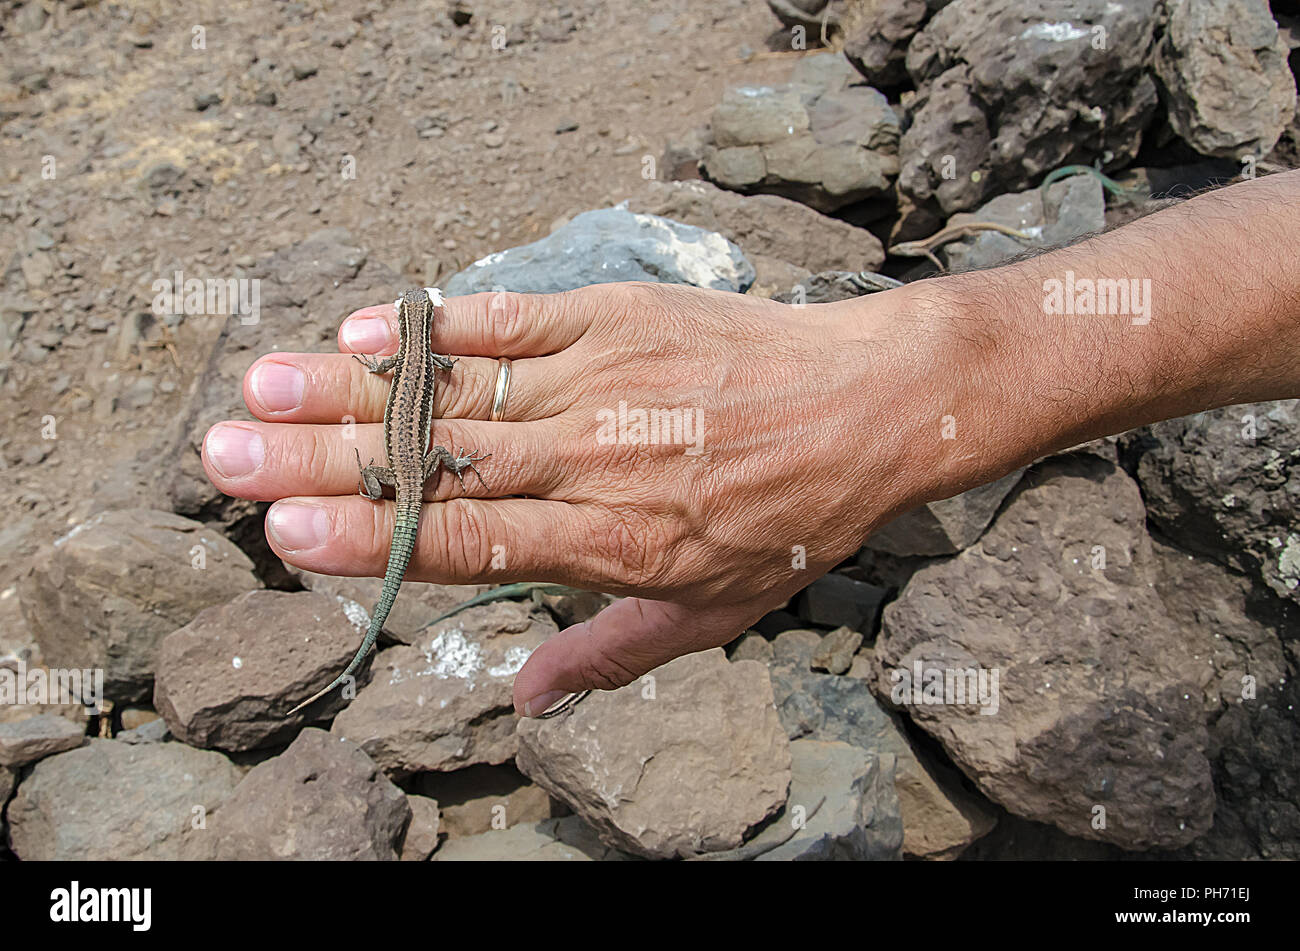 Feeding lizard from hand. Colorful wild lizard with piece of bread in its mouth is running over man's hand. Unfocused rocks with lizards at background Stock Photo